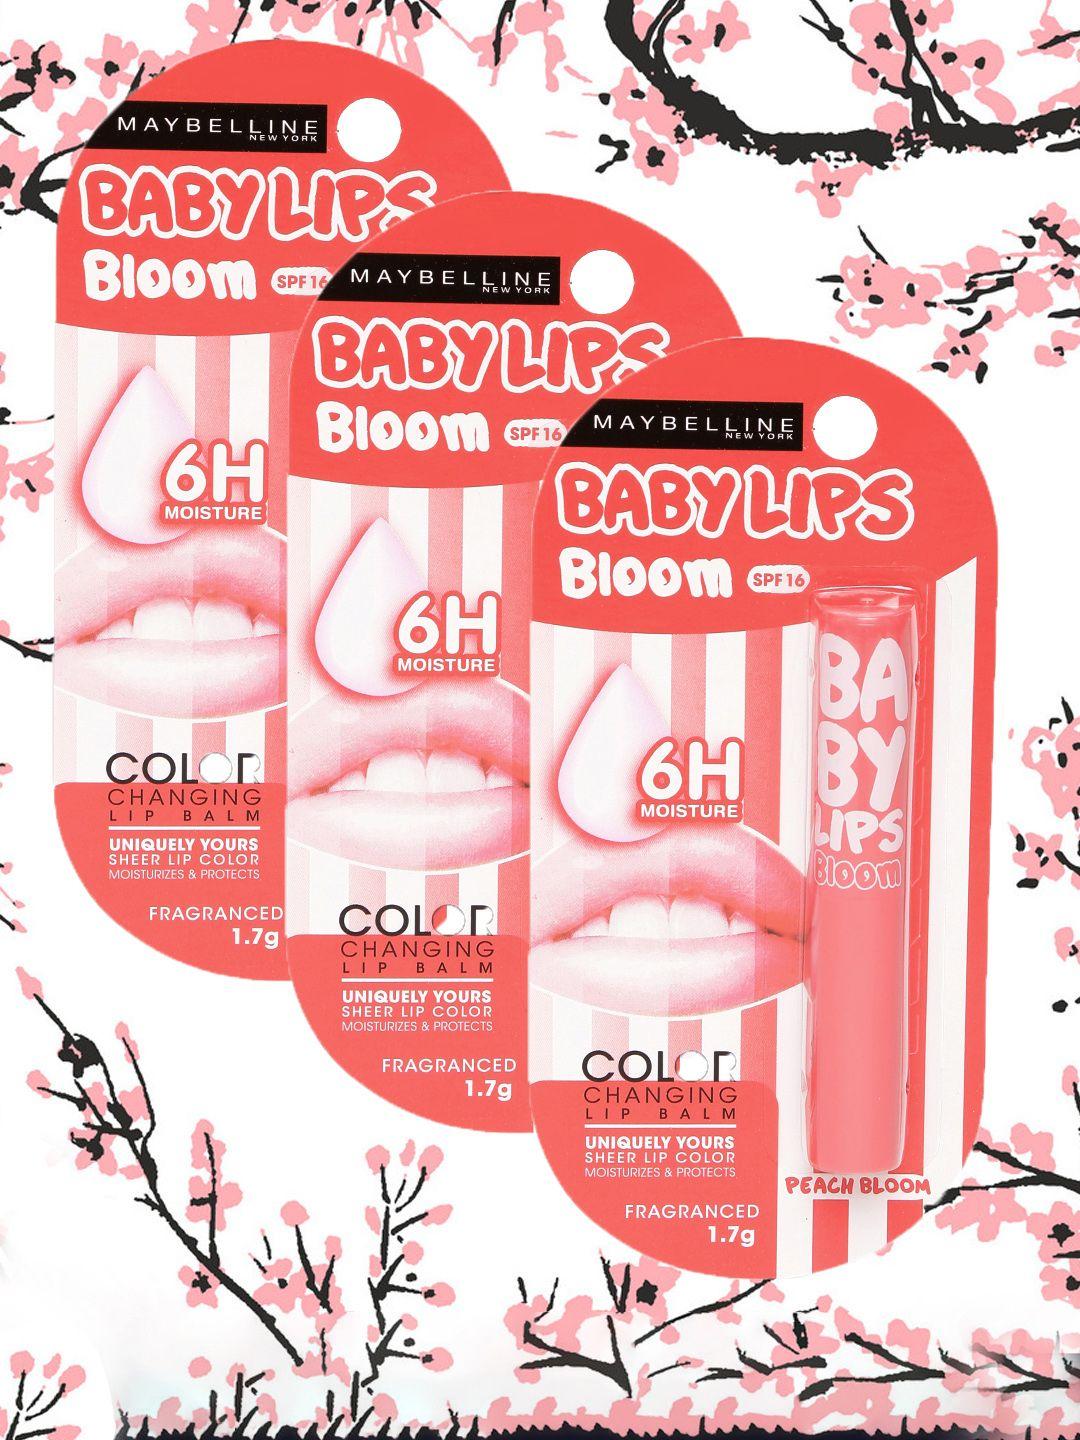 maybelline set of 3 baby lips bloom color changing lip balm - peach bloom